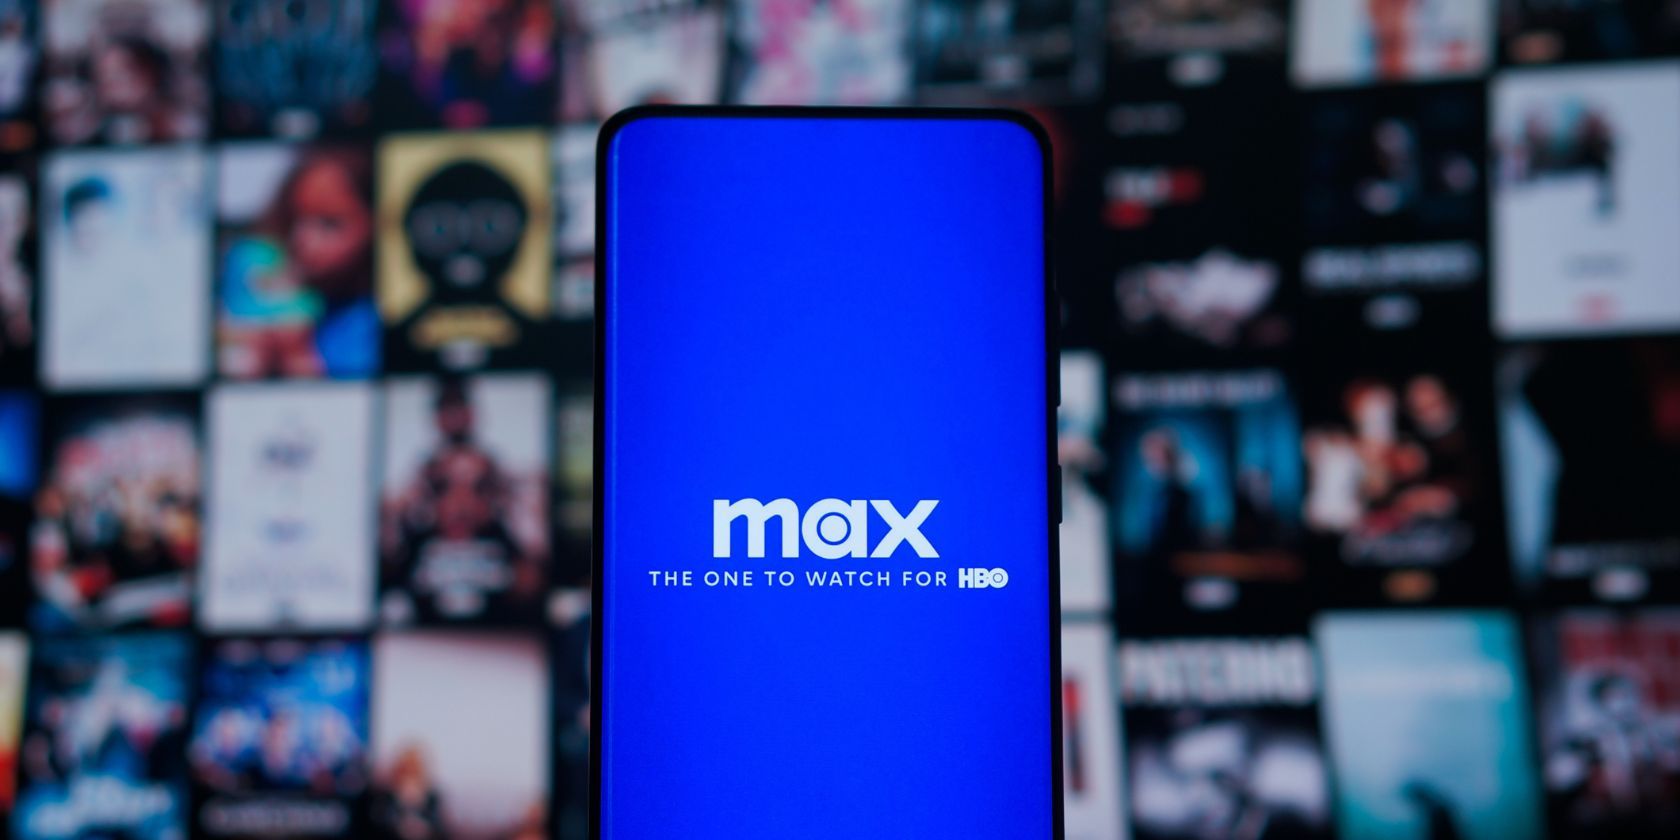 max logo on smartphone in front of a tv screen